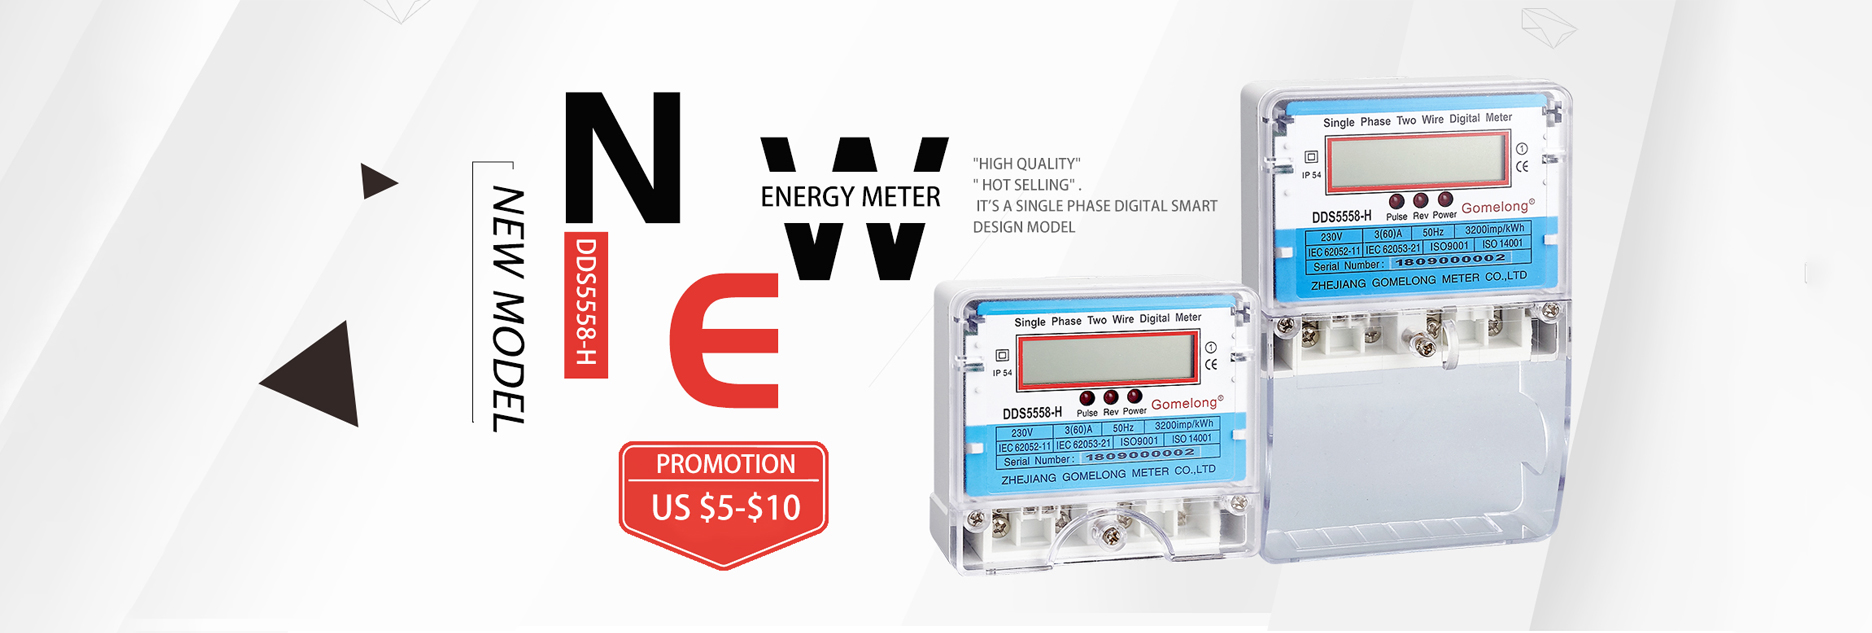 SINGLE PHASE TWO WIRE DIGITAL METER